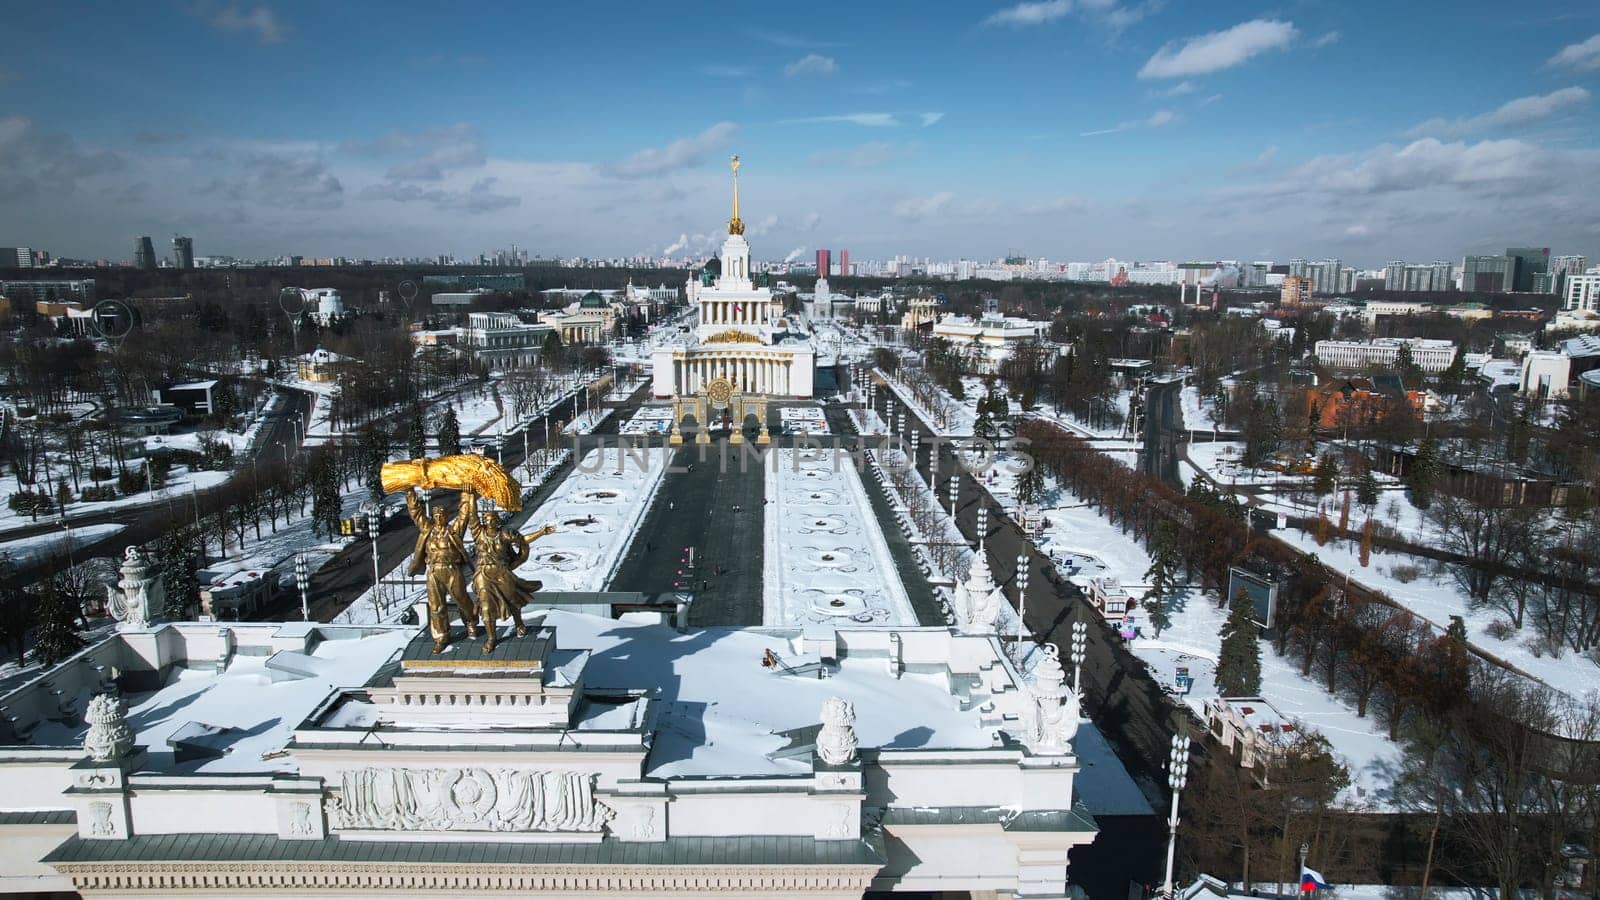 Top view of historic Soviet Square in winter. Creative. Historical buildings with monuments and arches in city center. Winter cityscape with historical center and square.